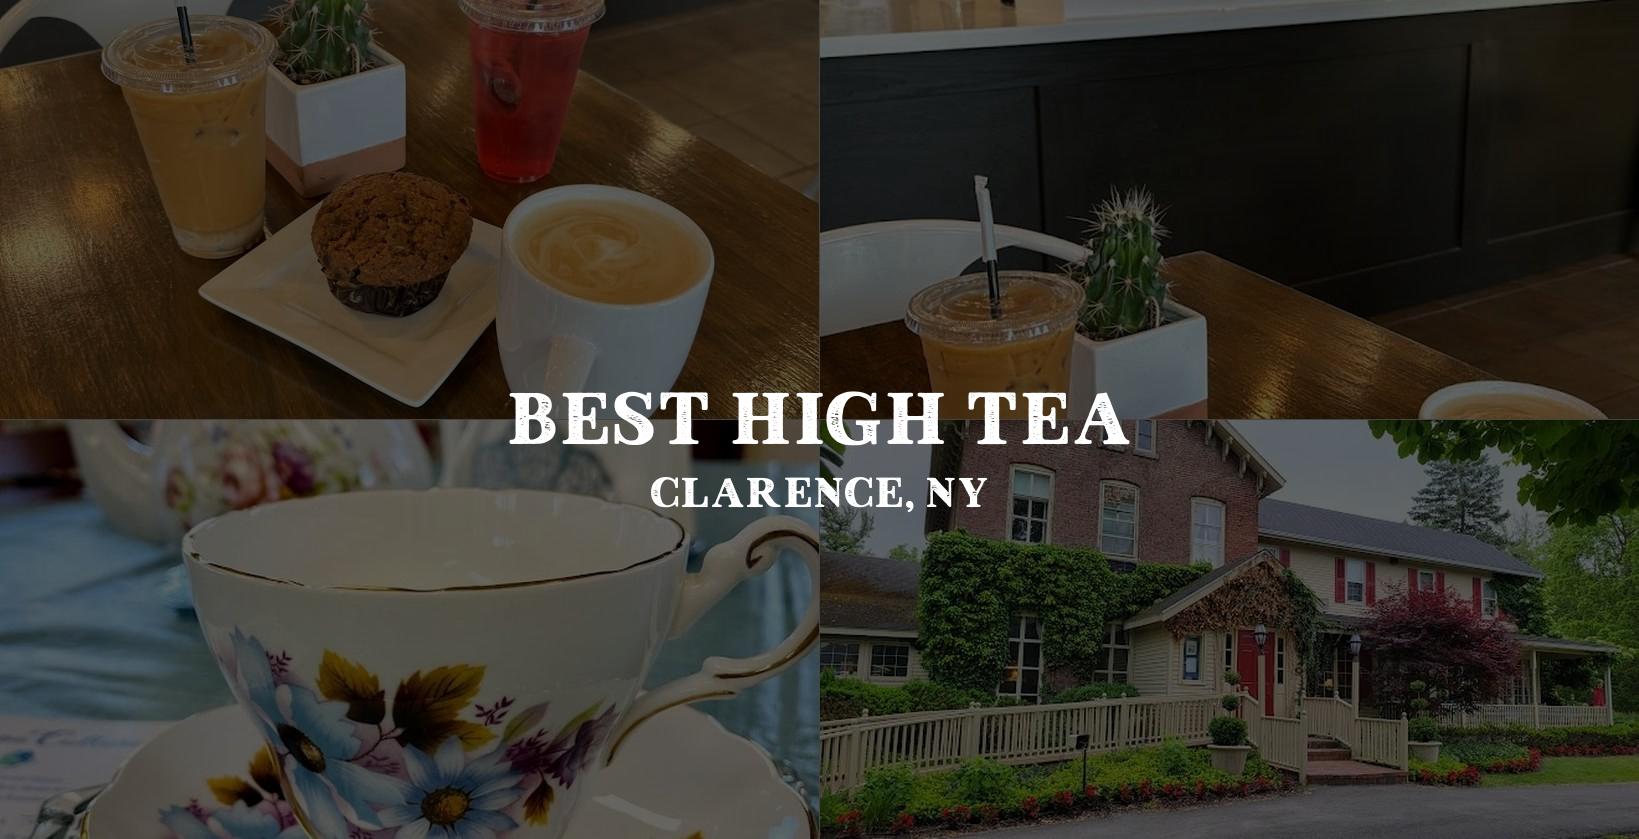 Best High Tea in Clarence, NY